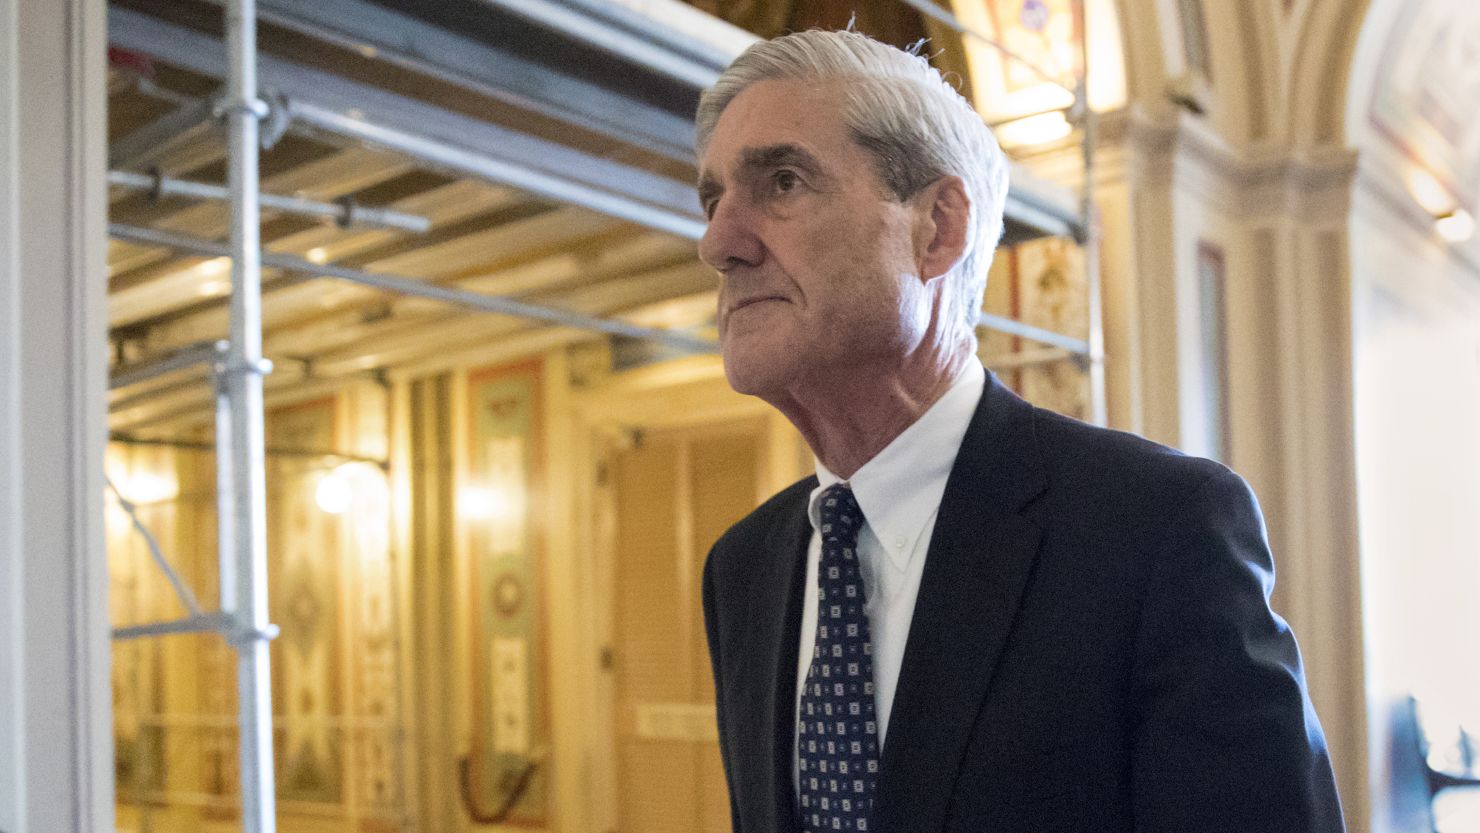 FILE - In this June 21, 2017, file photo, special counsel Robert Mueller departs after a meeting on Capitol Hill in Washington. Mueller is set to reveal more details about his Russia investigation as he faces court deadlines in the cases of two men who worked closely with President Donald Trump. (AP Photo/J. Scott Applewhite, File)